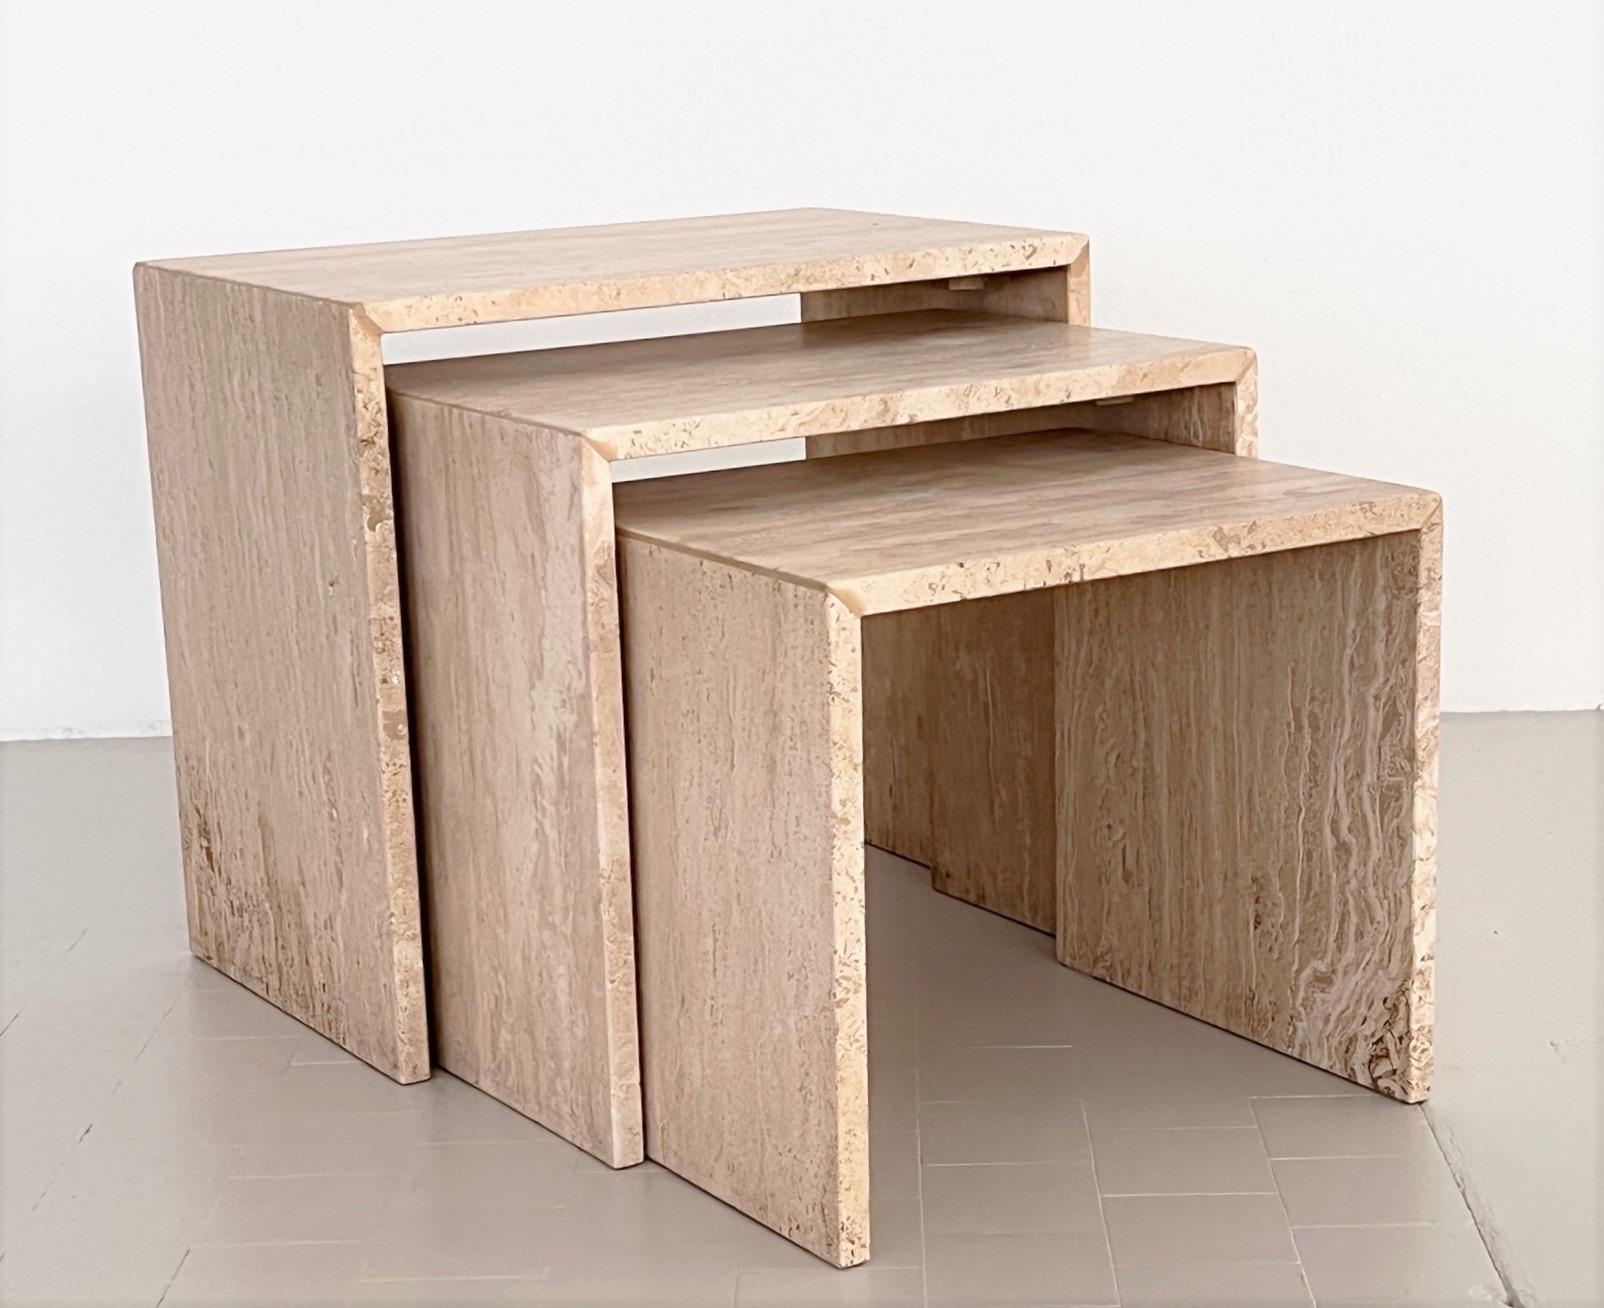 Italian Nesting Coffee Tables in Travertine Stone from the 1970s, Set of Three For Sale